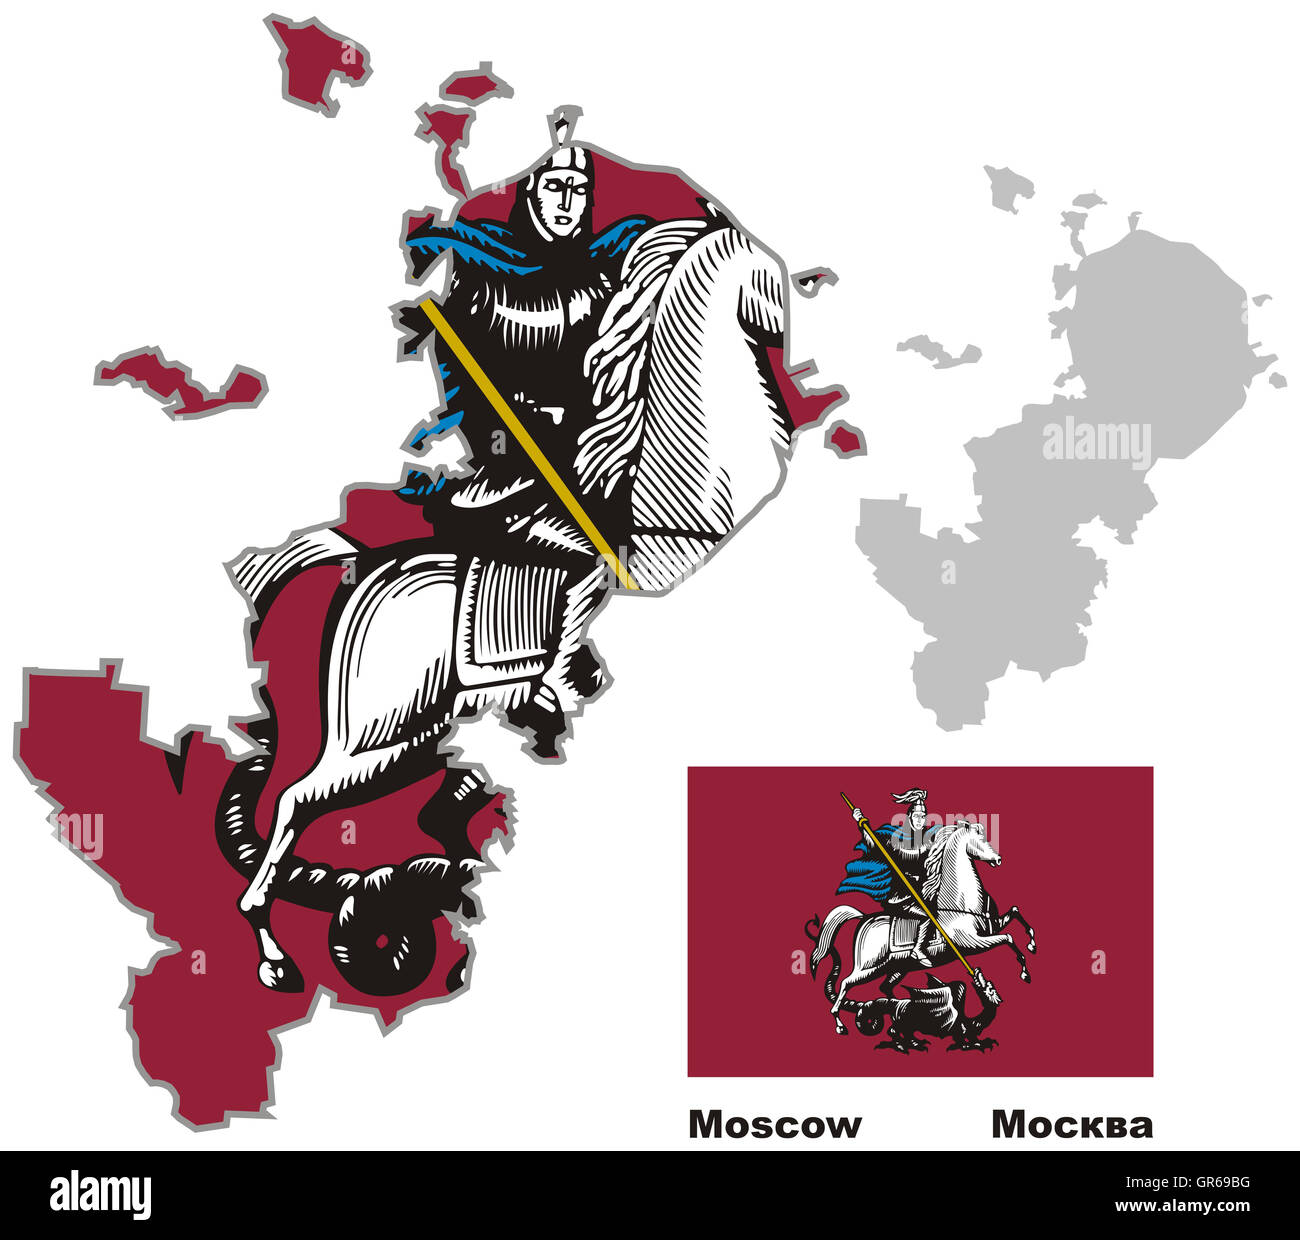 Outline map of Moscow with flag. Regions of Russia. Vector illustration. Stock Photo